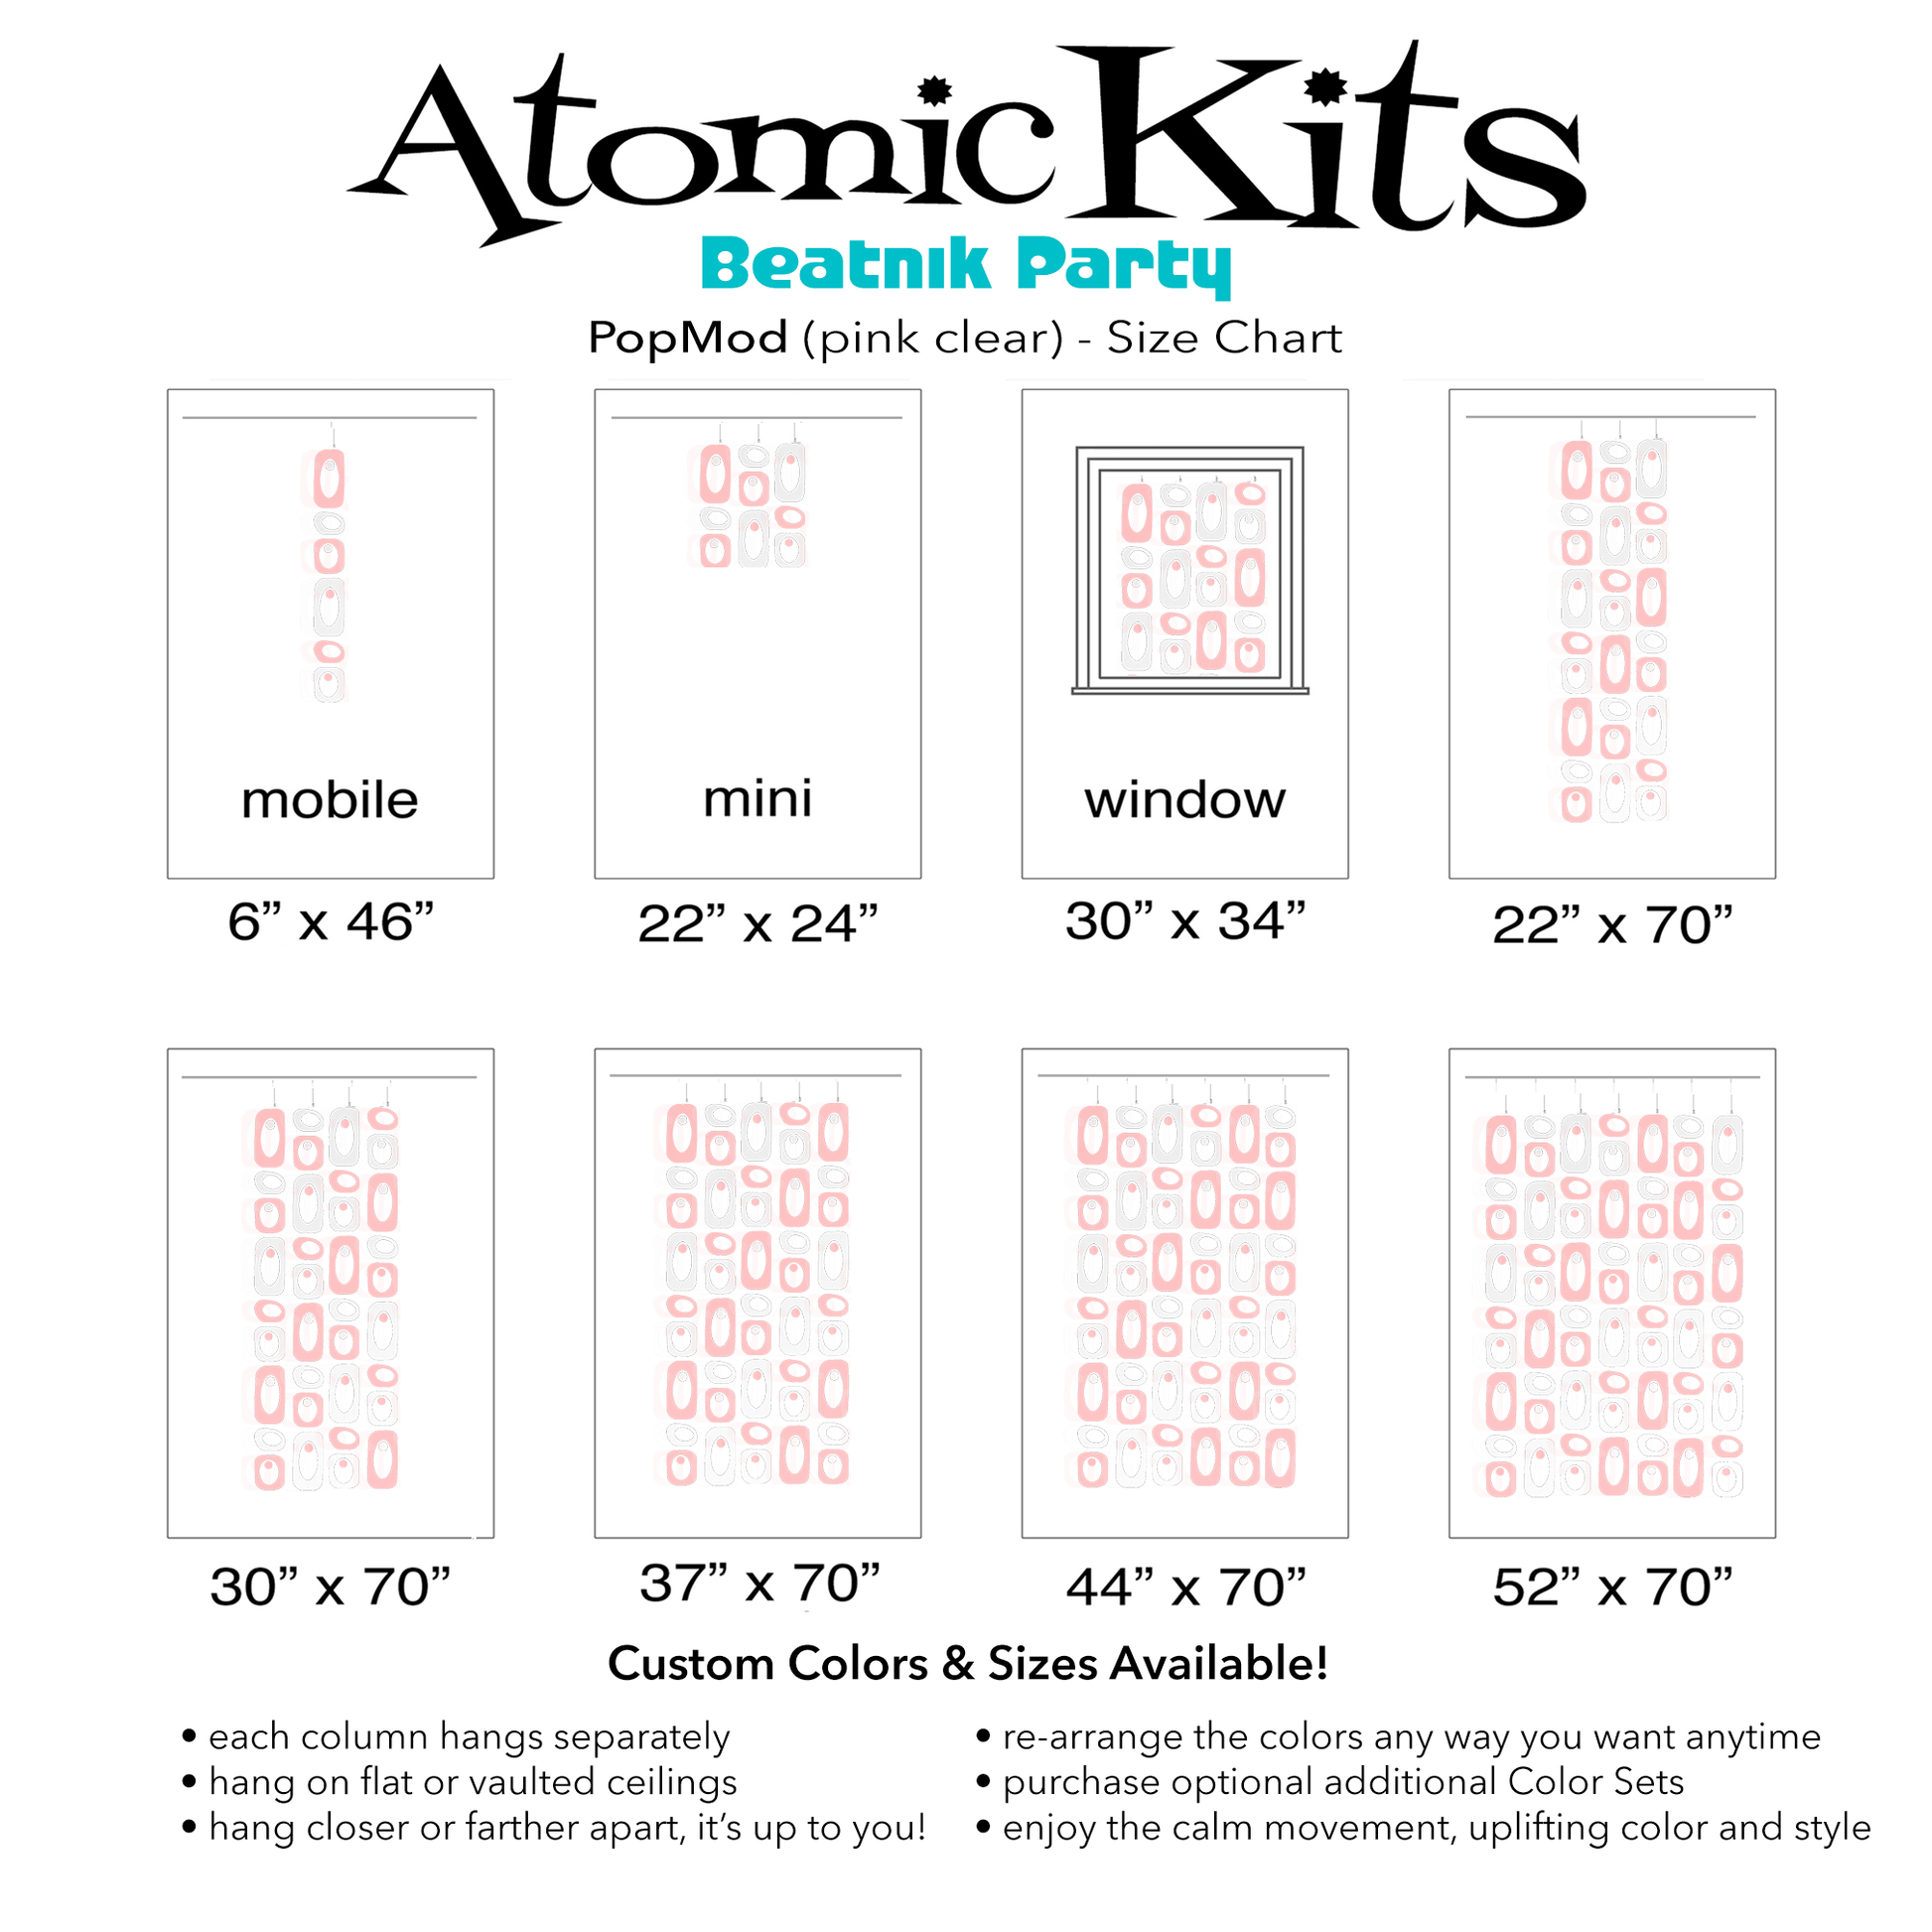 Color Chart for pretty pink and clear DIY Atomic Kits - hanging art mobiles, curtains, room dividers, screens by AtomicMobiles.com